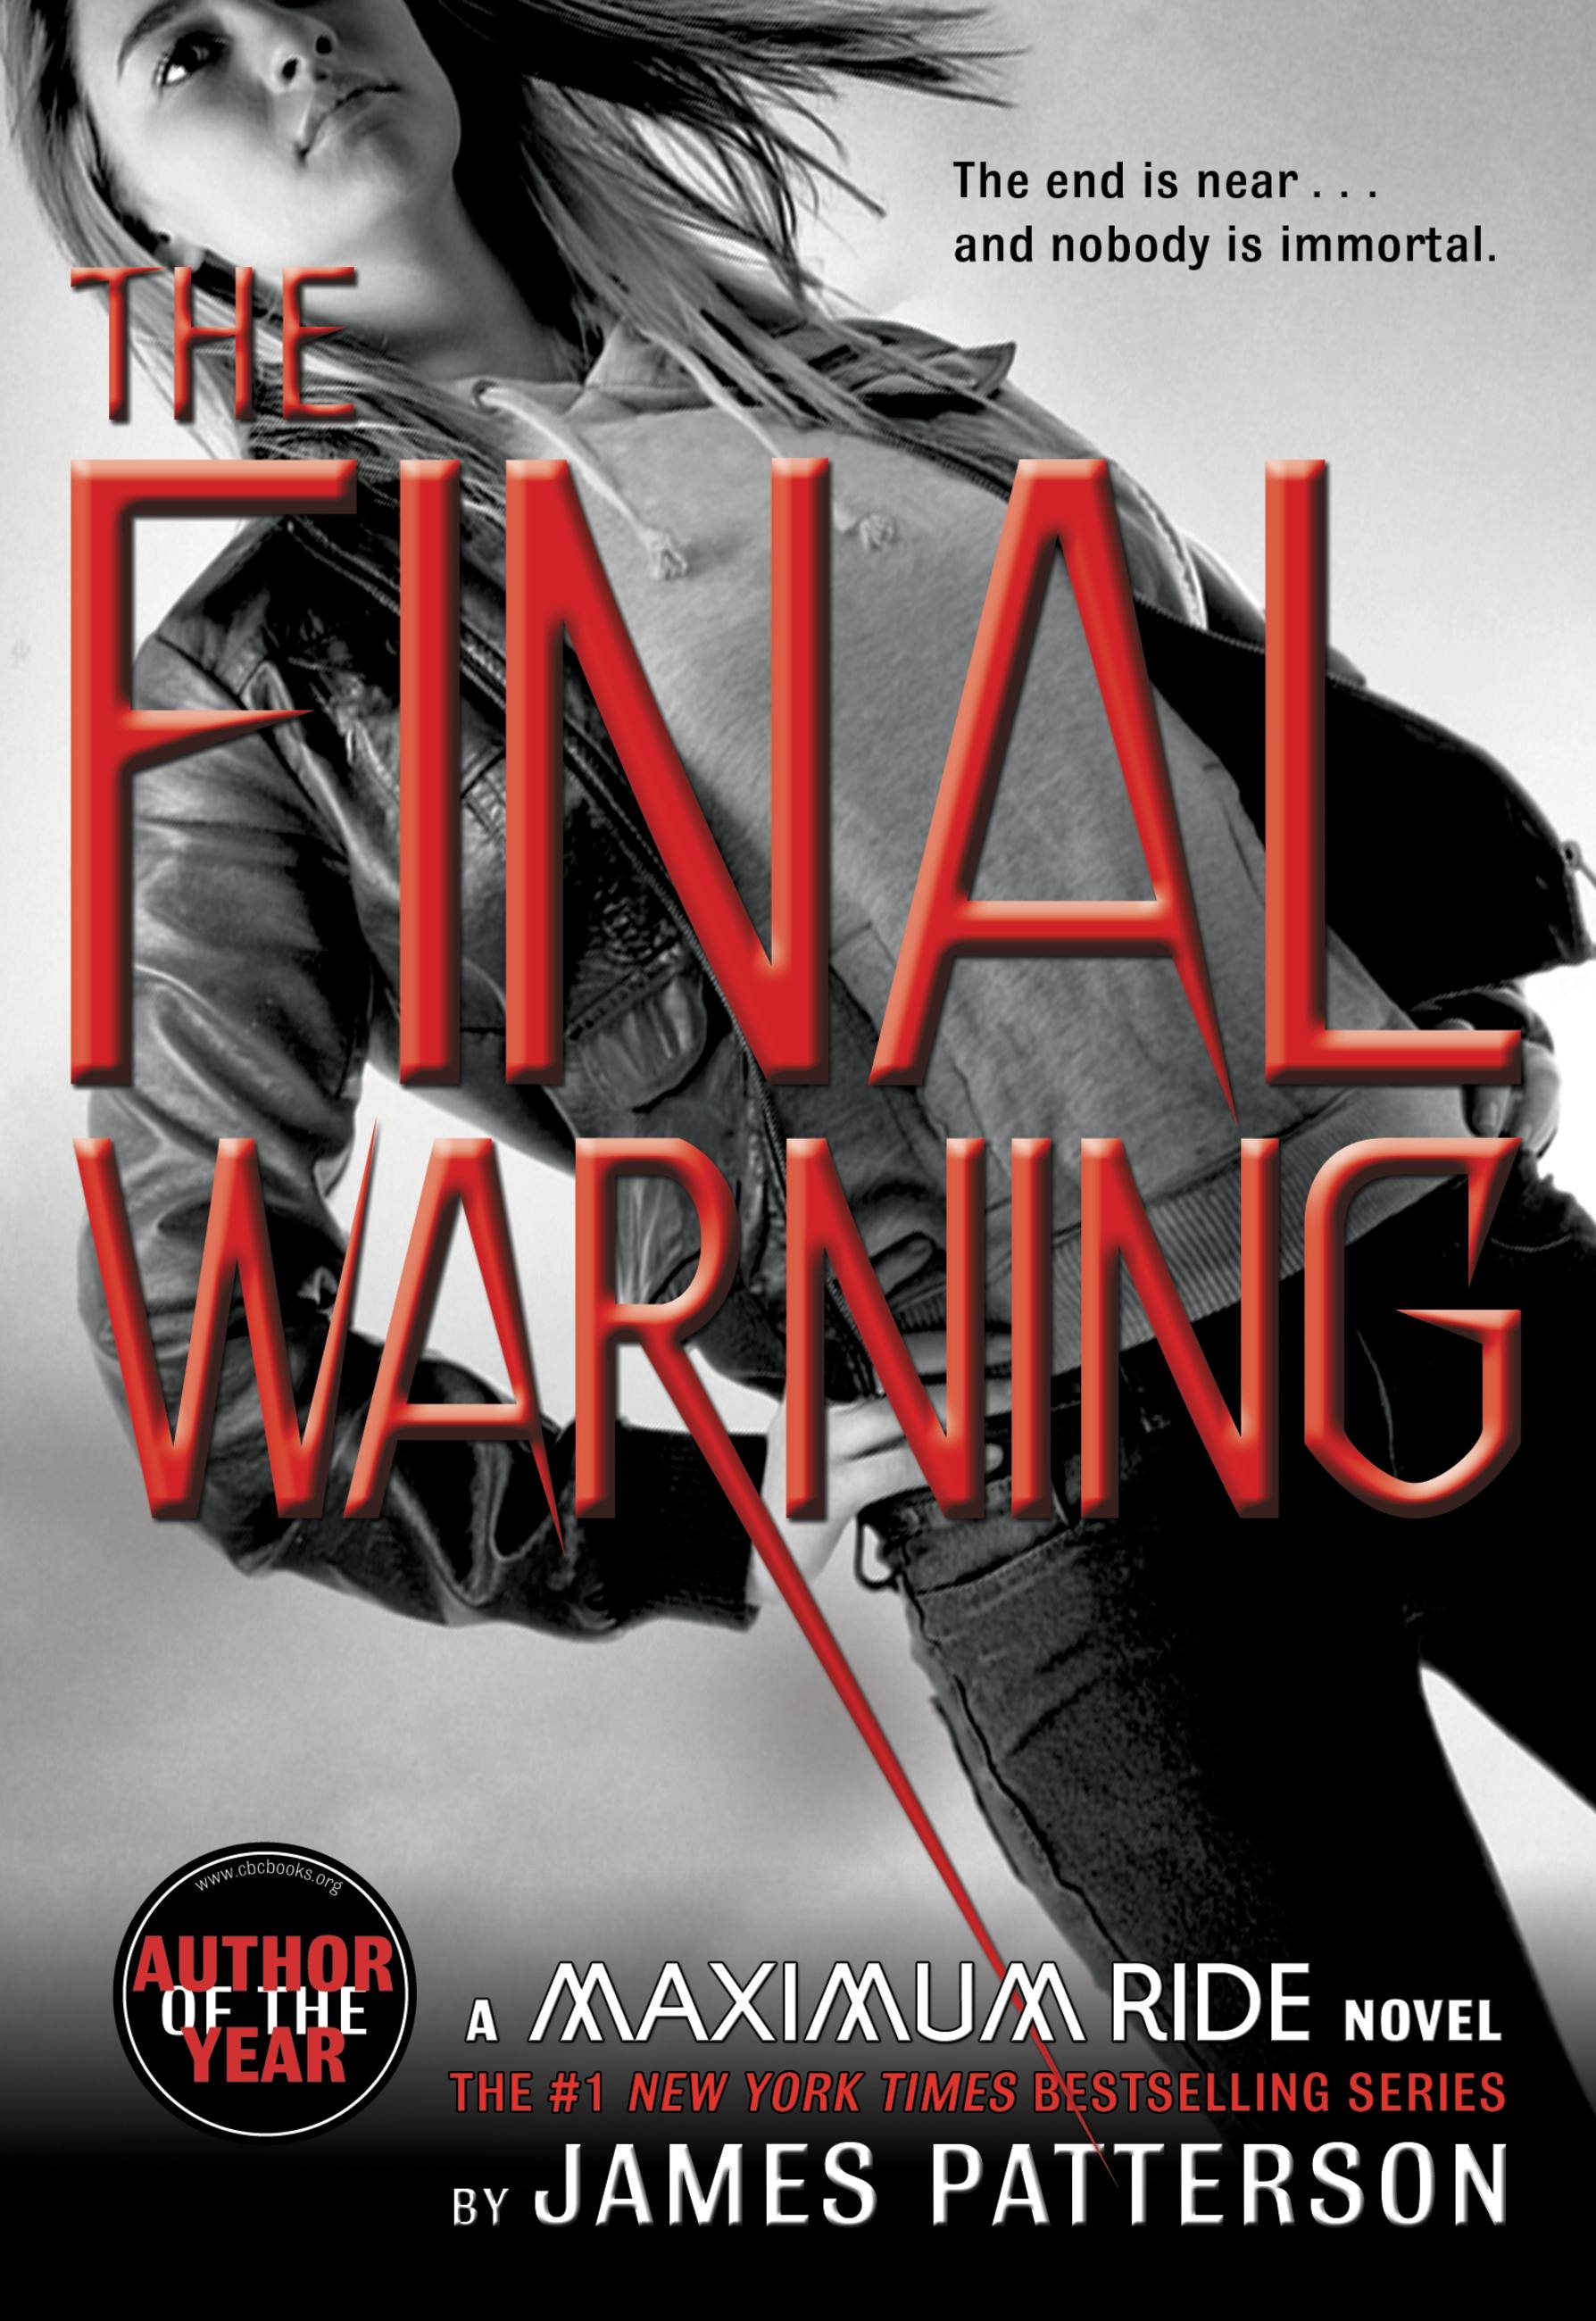 The Final Warning by James Patterson Hachette Book Group